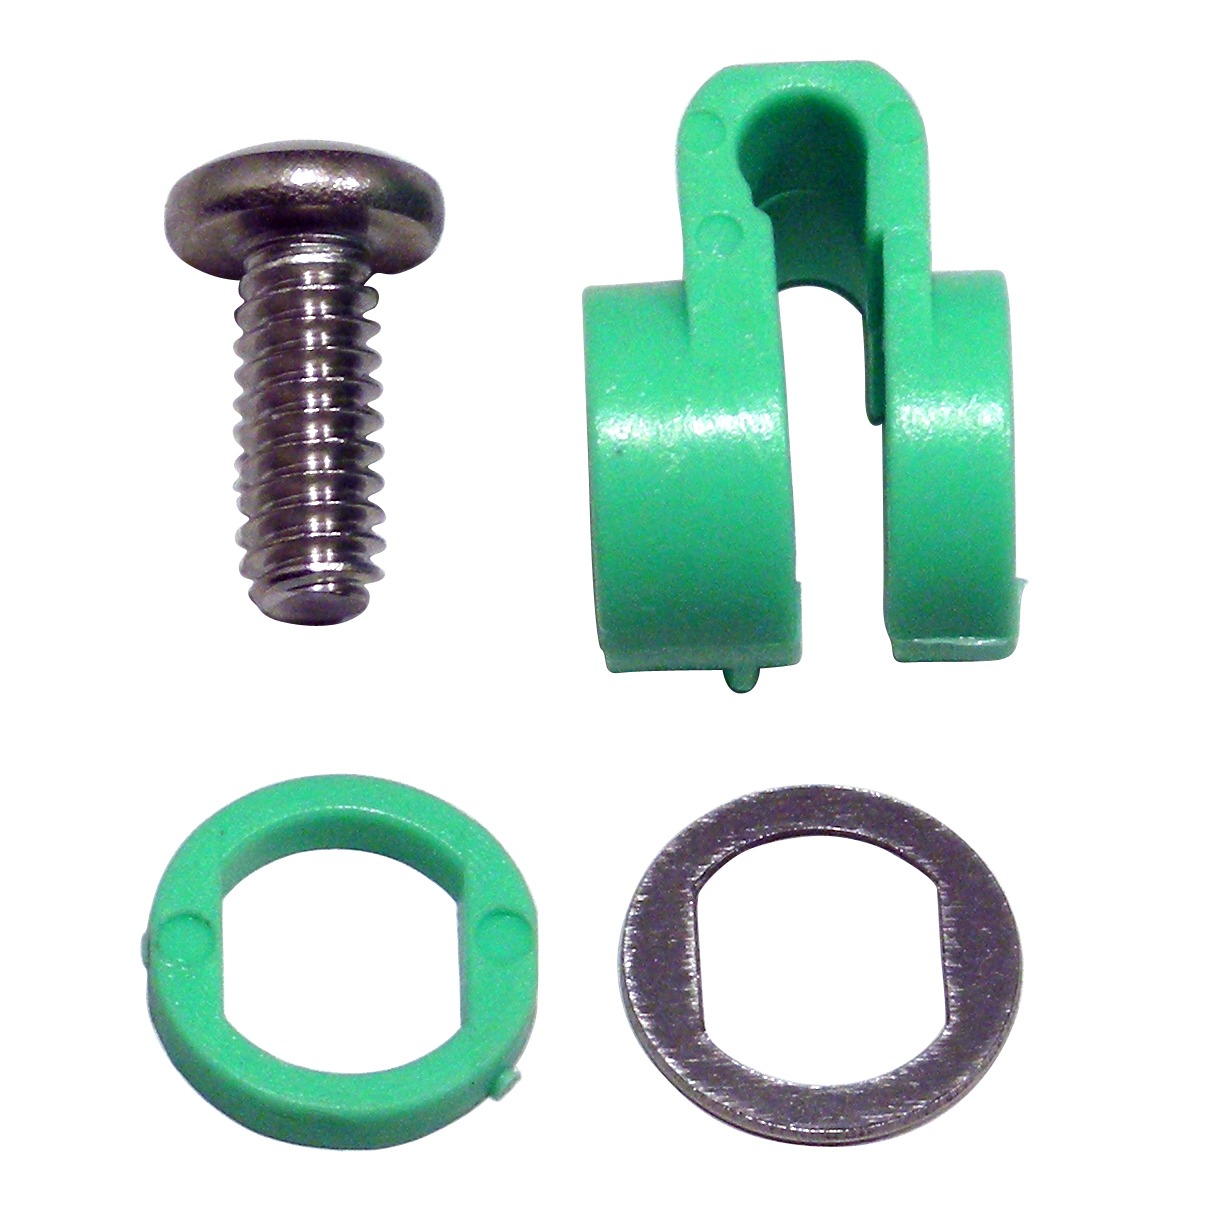 Connector Kit for Moen Faucets